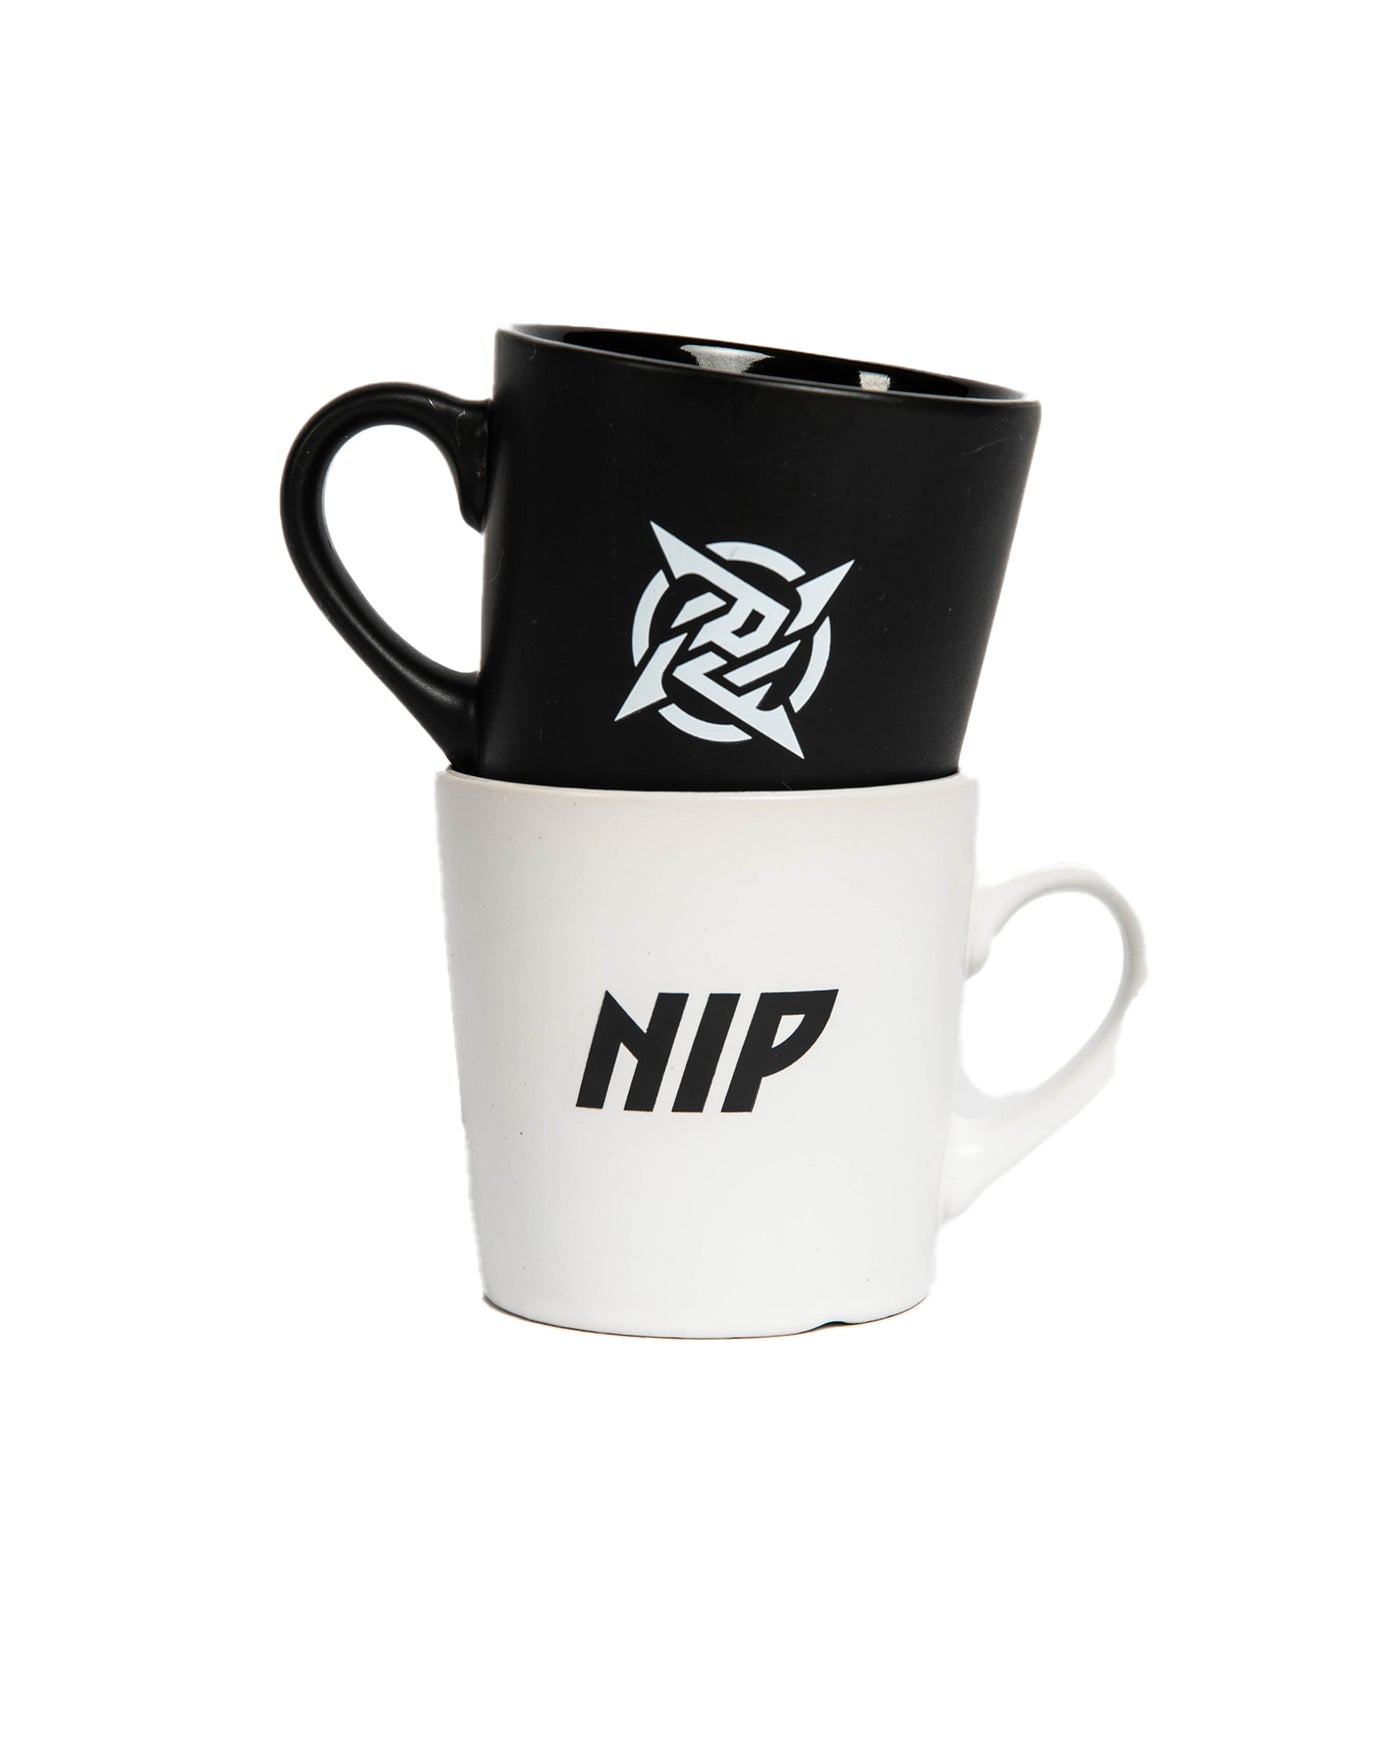 Lagom Mug - White from Ninjas in Pyjamas Shop. A white mug from the Lagom Merch Collection, featuring the Ninjas in Pyjamas logo in sleek white print. This high-quality mug is perfect for enjoying your favorite beverages while expressing your passion forNIP and esports.